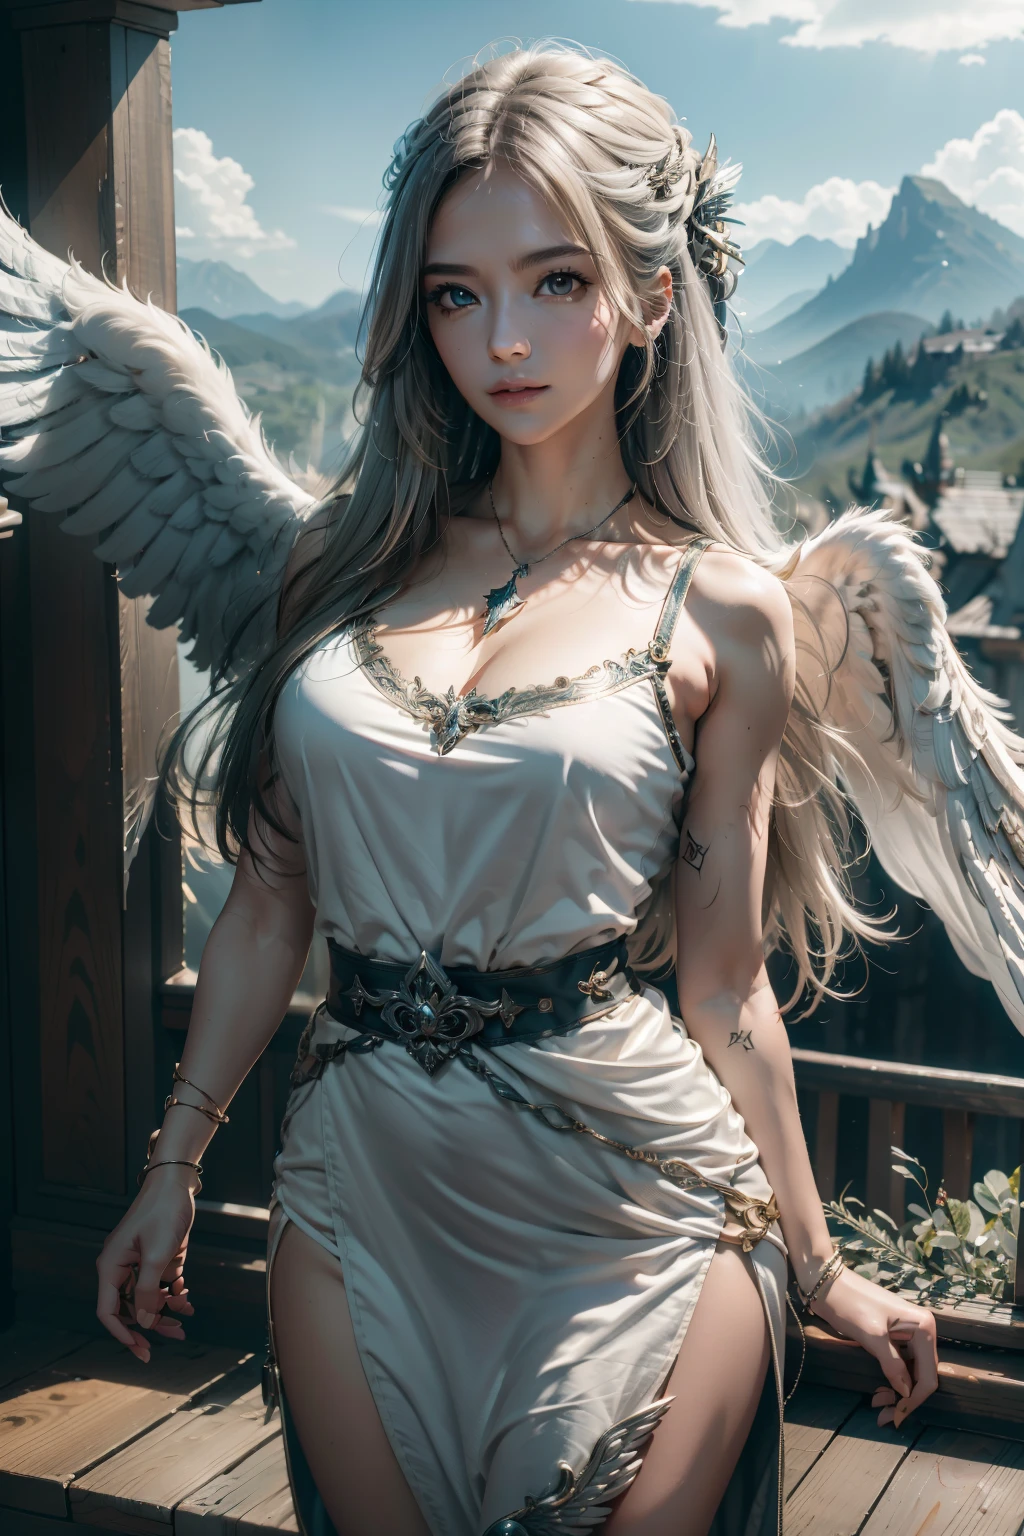 1 girl, solo, official art, unity 8k wallpaper, super detailed, prettify、beautiful, master piece, highest quality, Photoreal, female angel、There are six large white wings on the back:2.0、Wings of a bird of prey、Blazing Angel、Silver armor:2.0、Silver Gauntlet、Silver Sollet、White fabric、Hair ornament with small wings、Valkyrie、Very large wide sword、Circle of Shining Angels、angelic halo:2.0、magic of light、Depth of bounds written, great atmosphere, calm color palette, soft shading、You can see the forest in the distance、See remote mountain castles、grace、Looks like a whole body、big breast figure、big and full breasts、wide waist、floating in the air:2.0、fly in the sky:2.0、Fry high in the air、grassland sky、You can see the castle on the hill in the distance